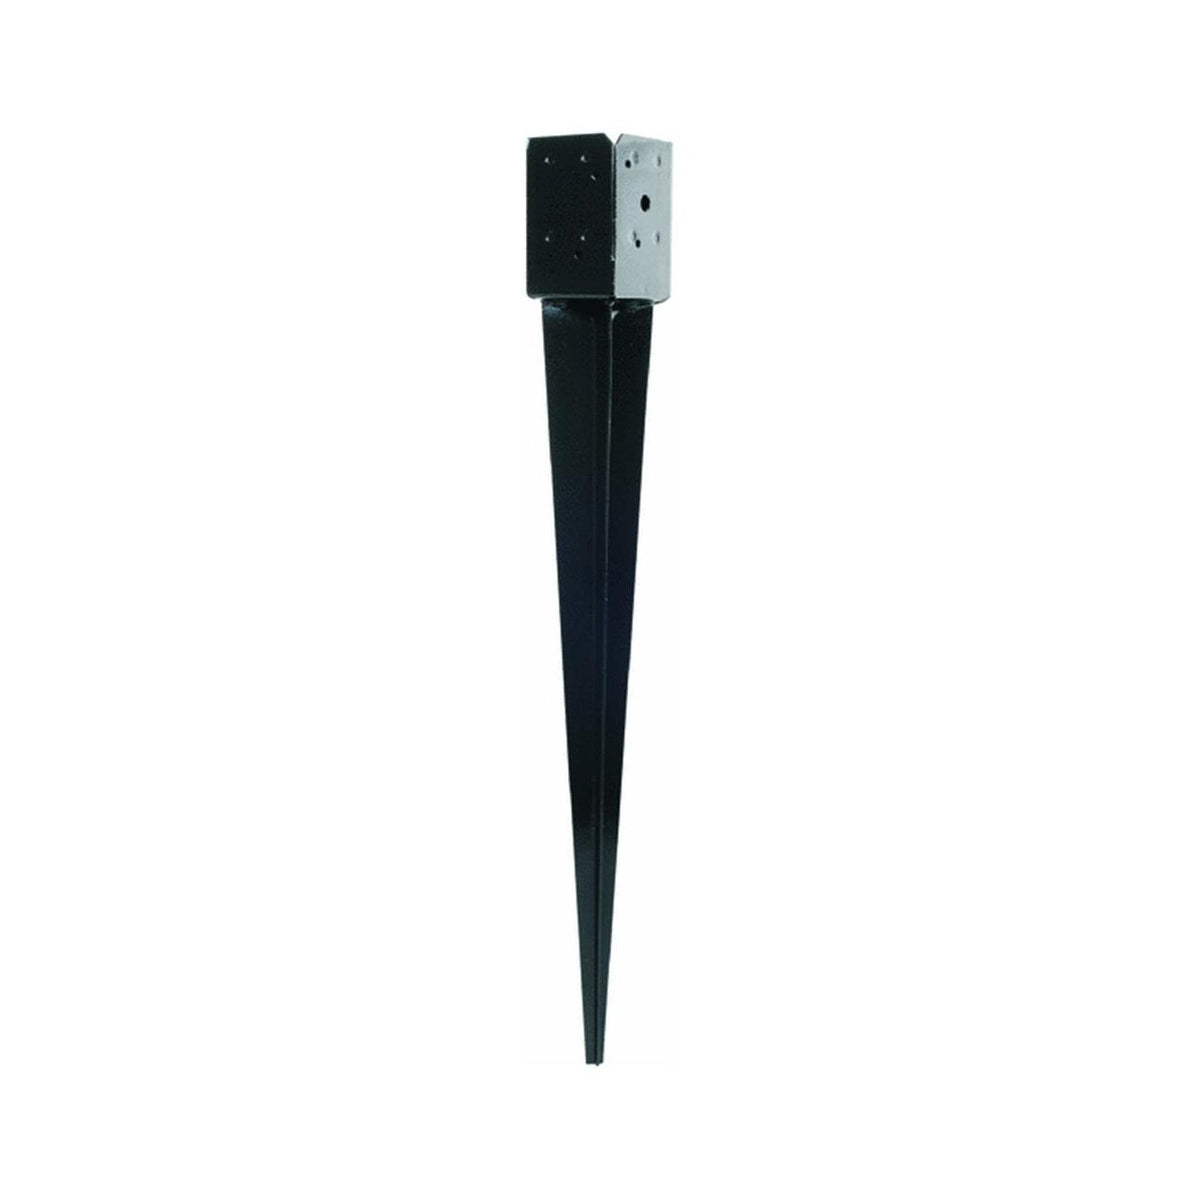 Simpson Strong-Tie FPBS44 E-Z Spike, 34-7/8"